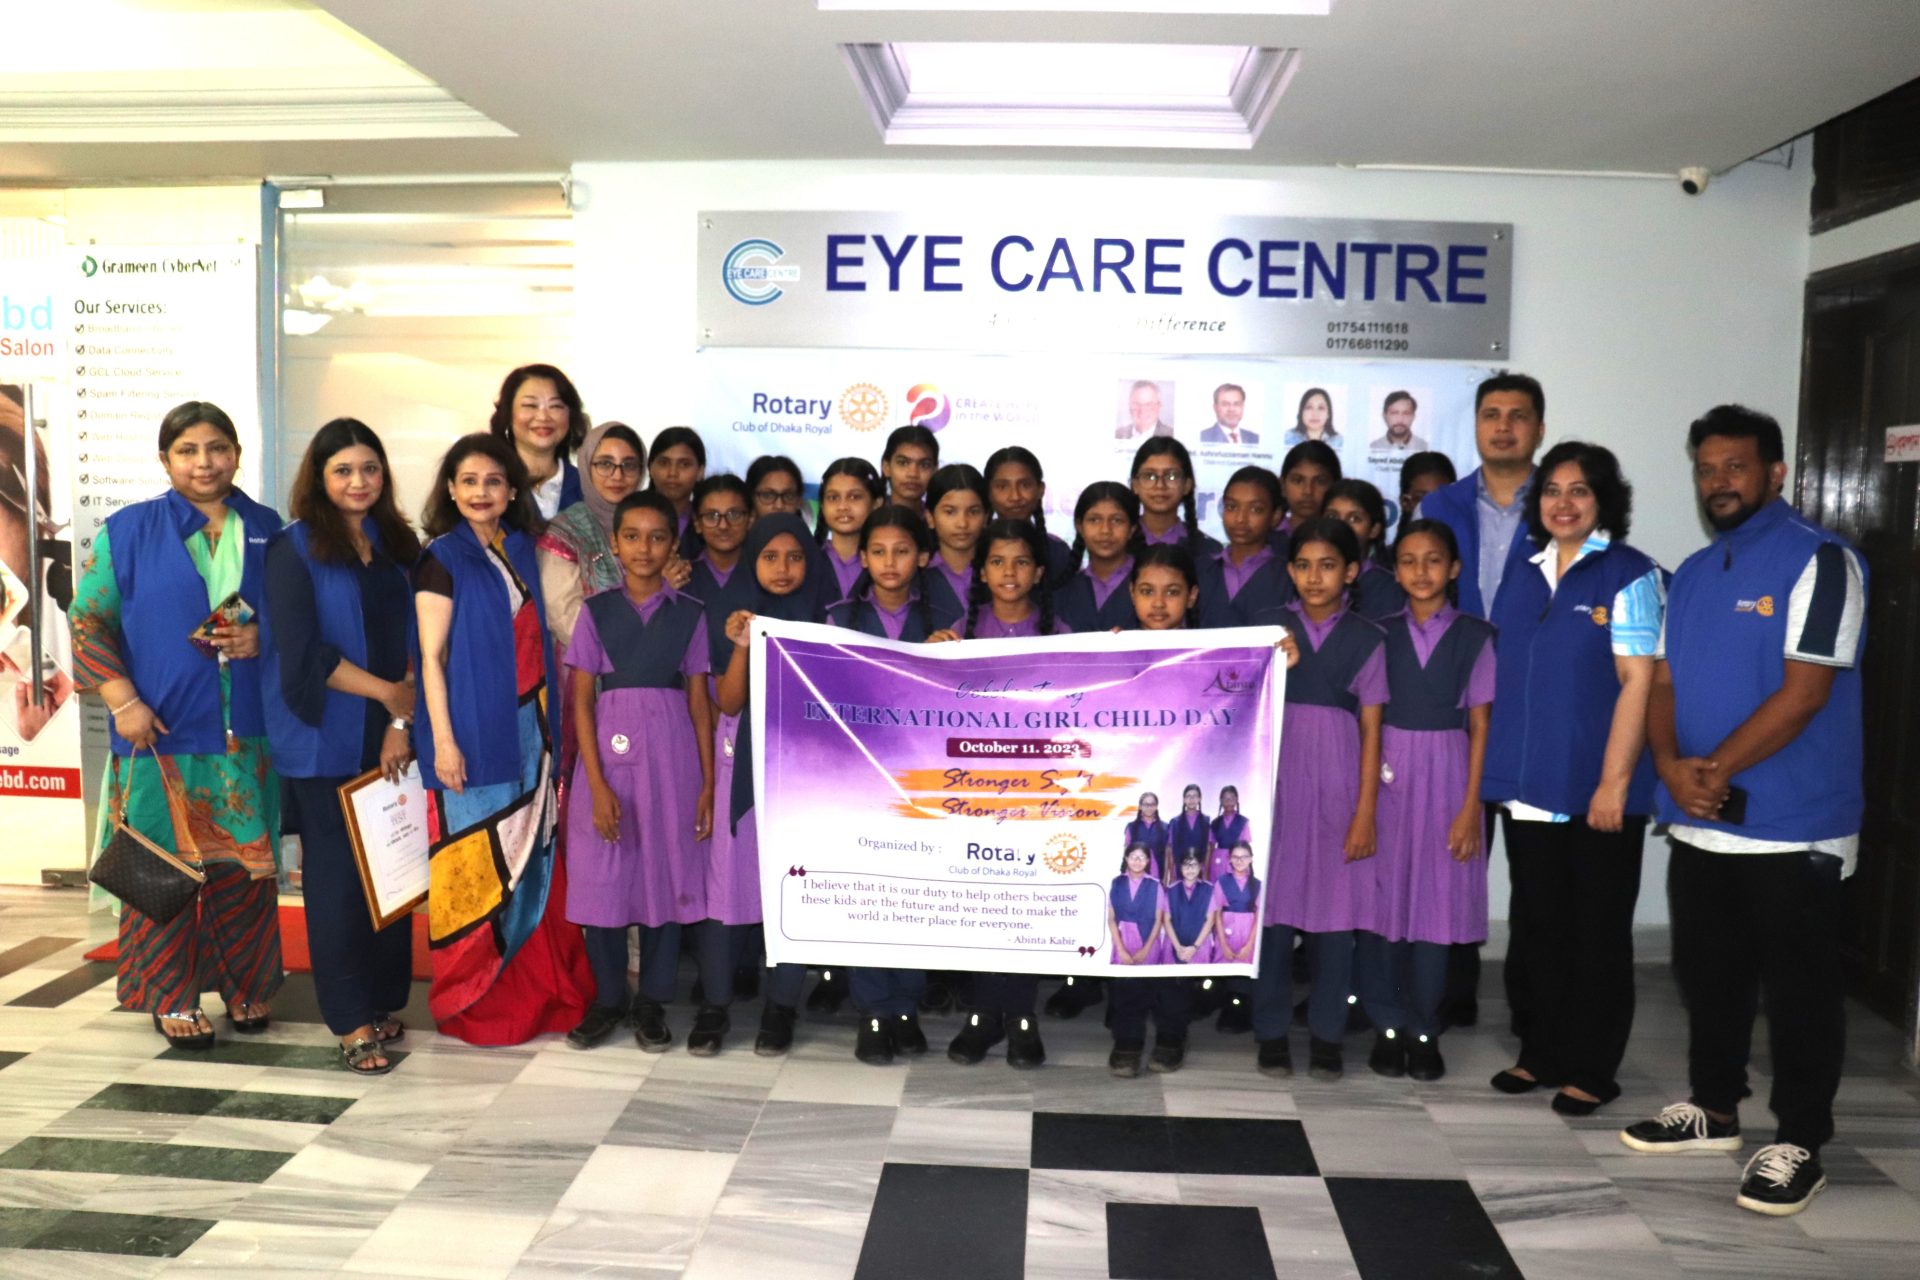 Eye checkup campaign by Rotary Club of Dhaka Royal to commemorate International Girl Child Day